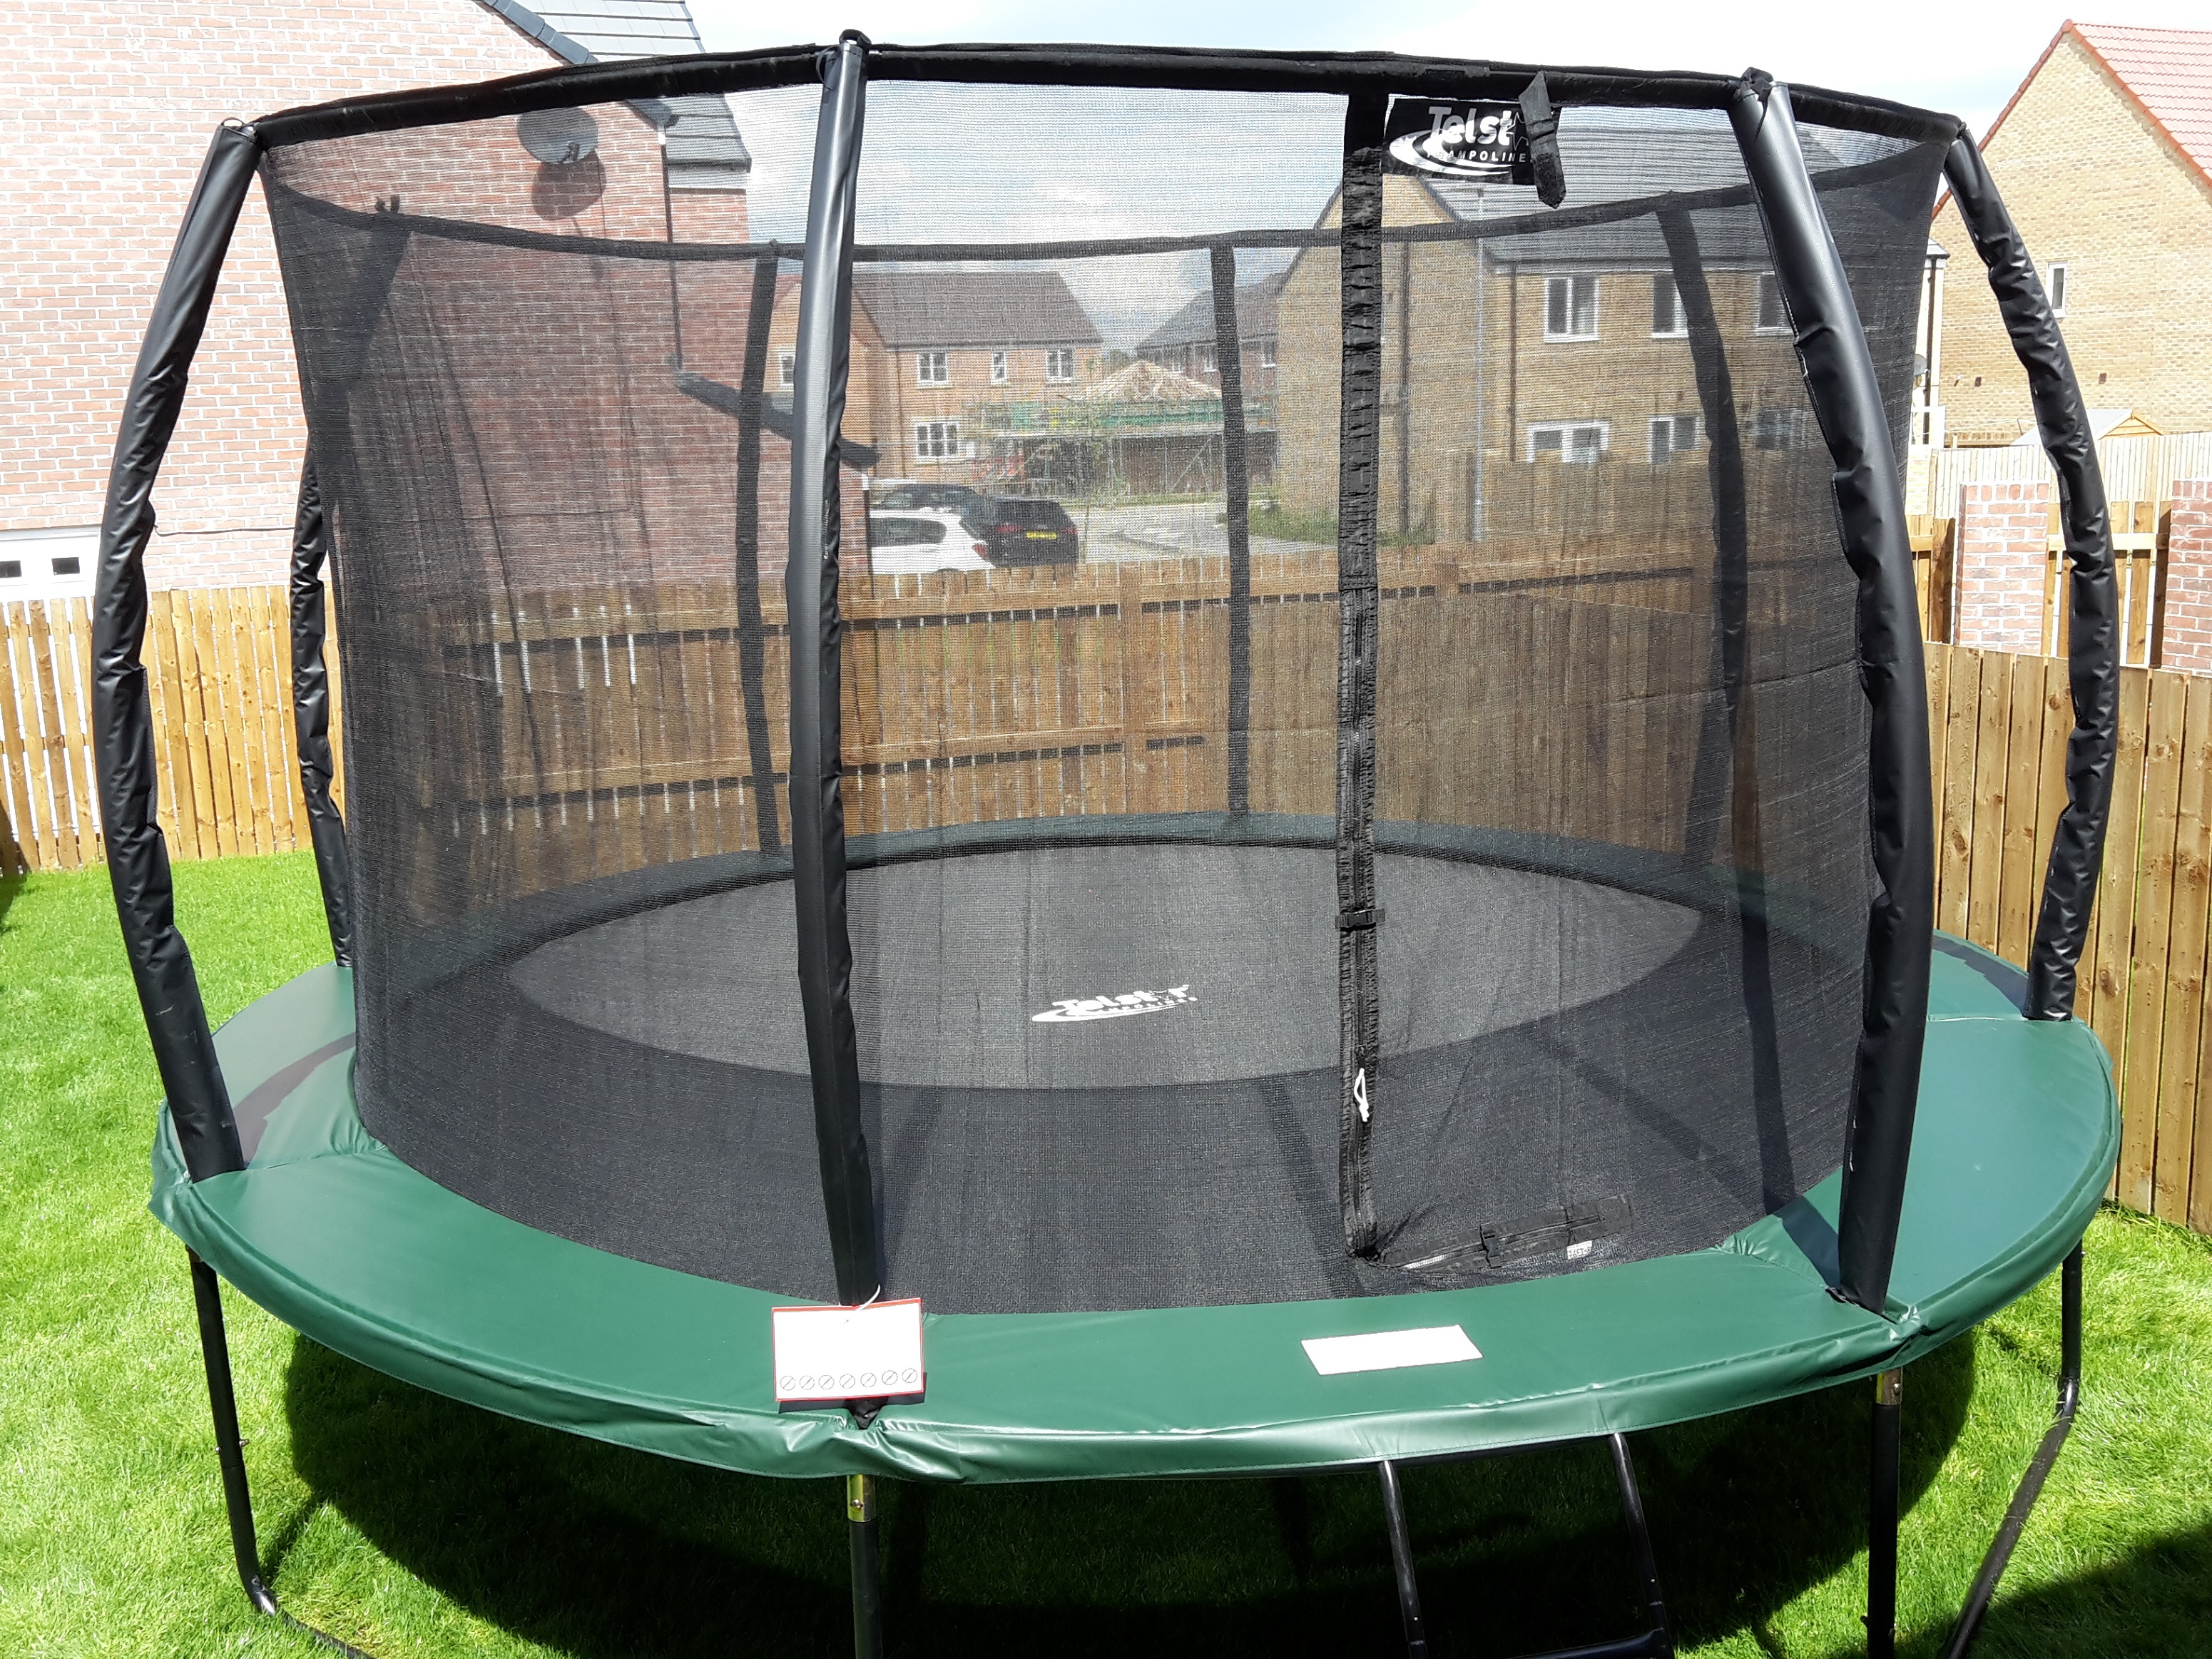 Another Trampoline Assembly!